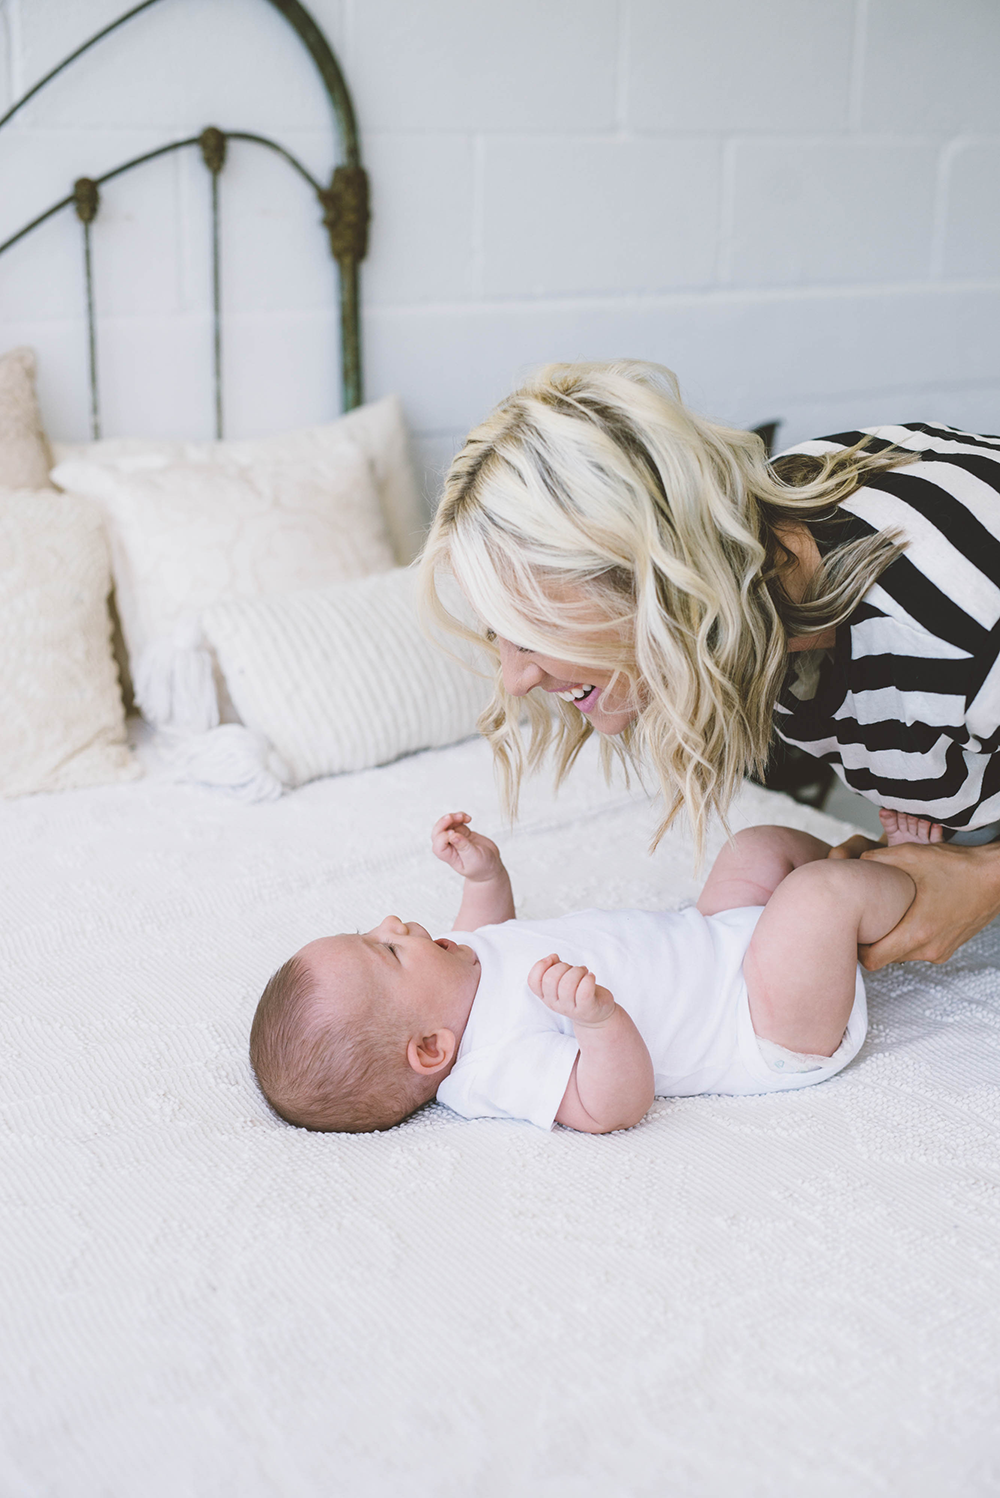 Why Breastfeeding May Be The Best Way to Bond With Your Baby | Little Miss Fearless